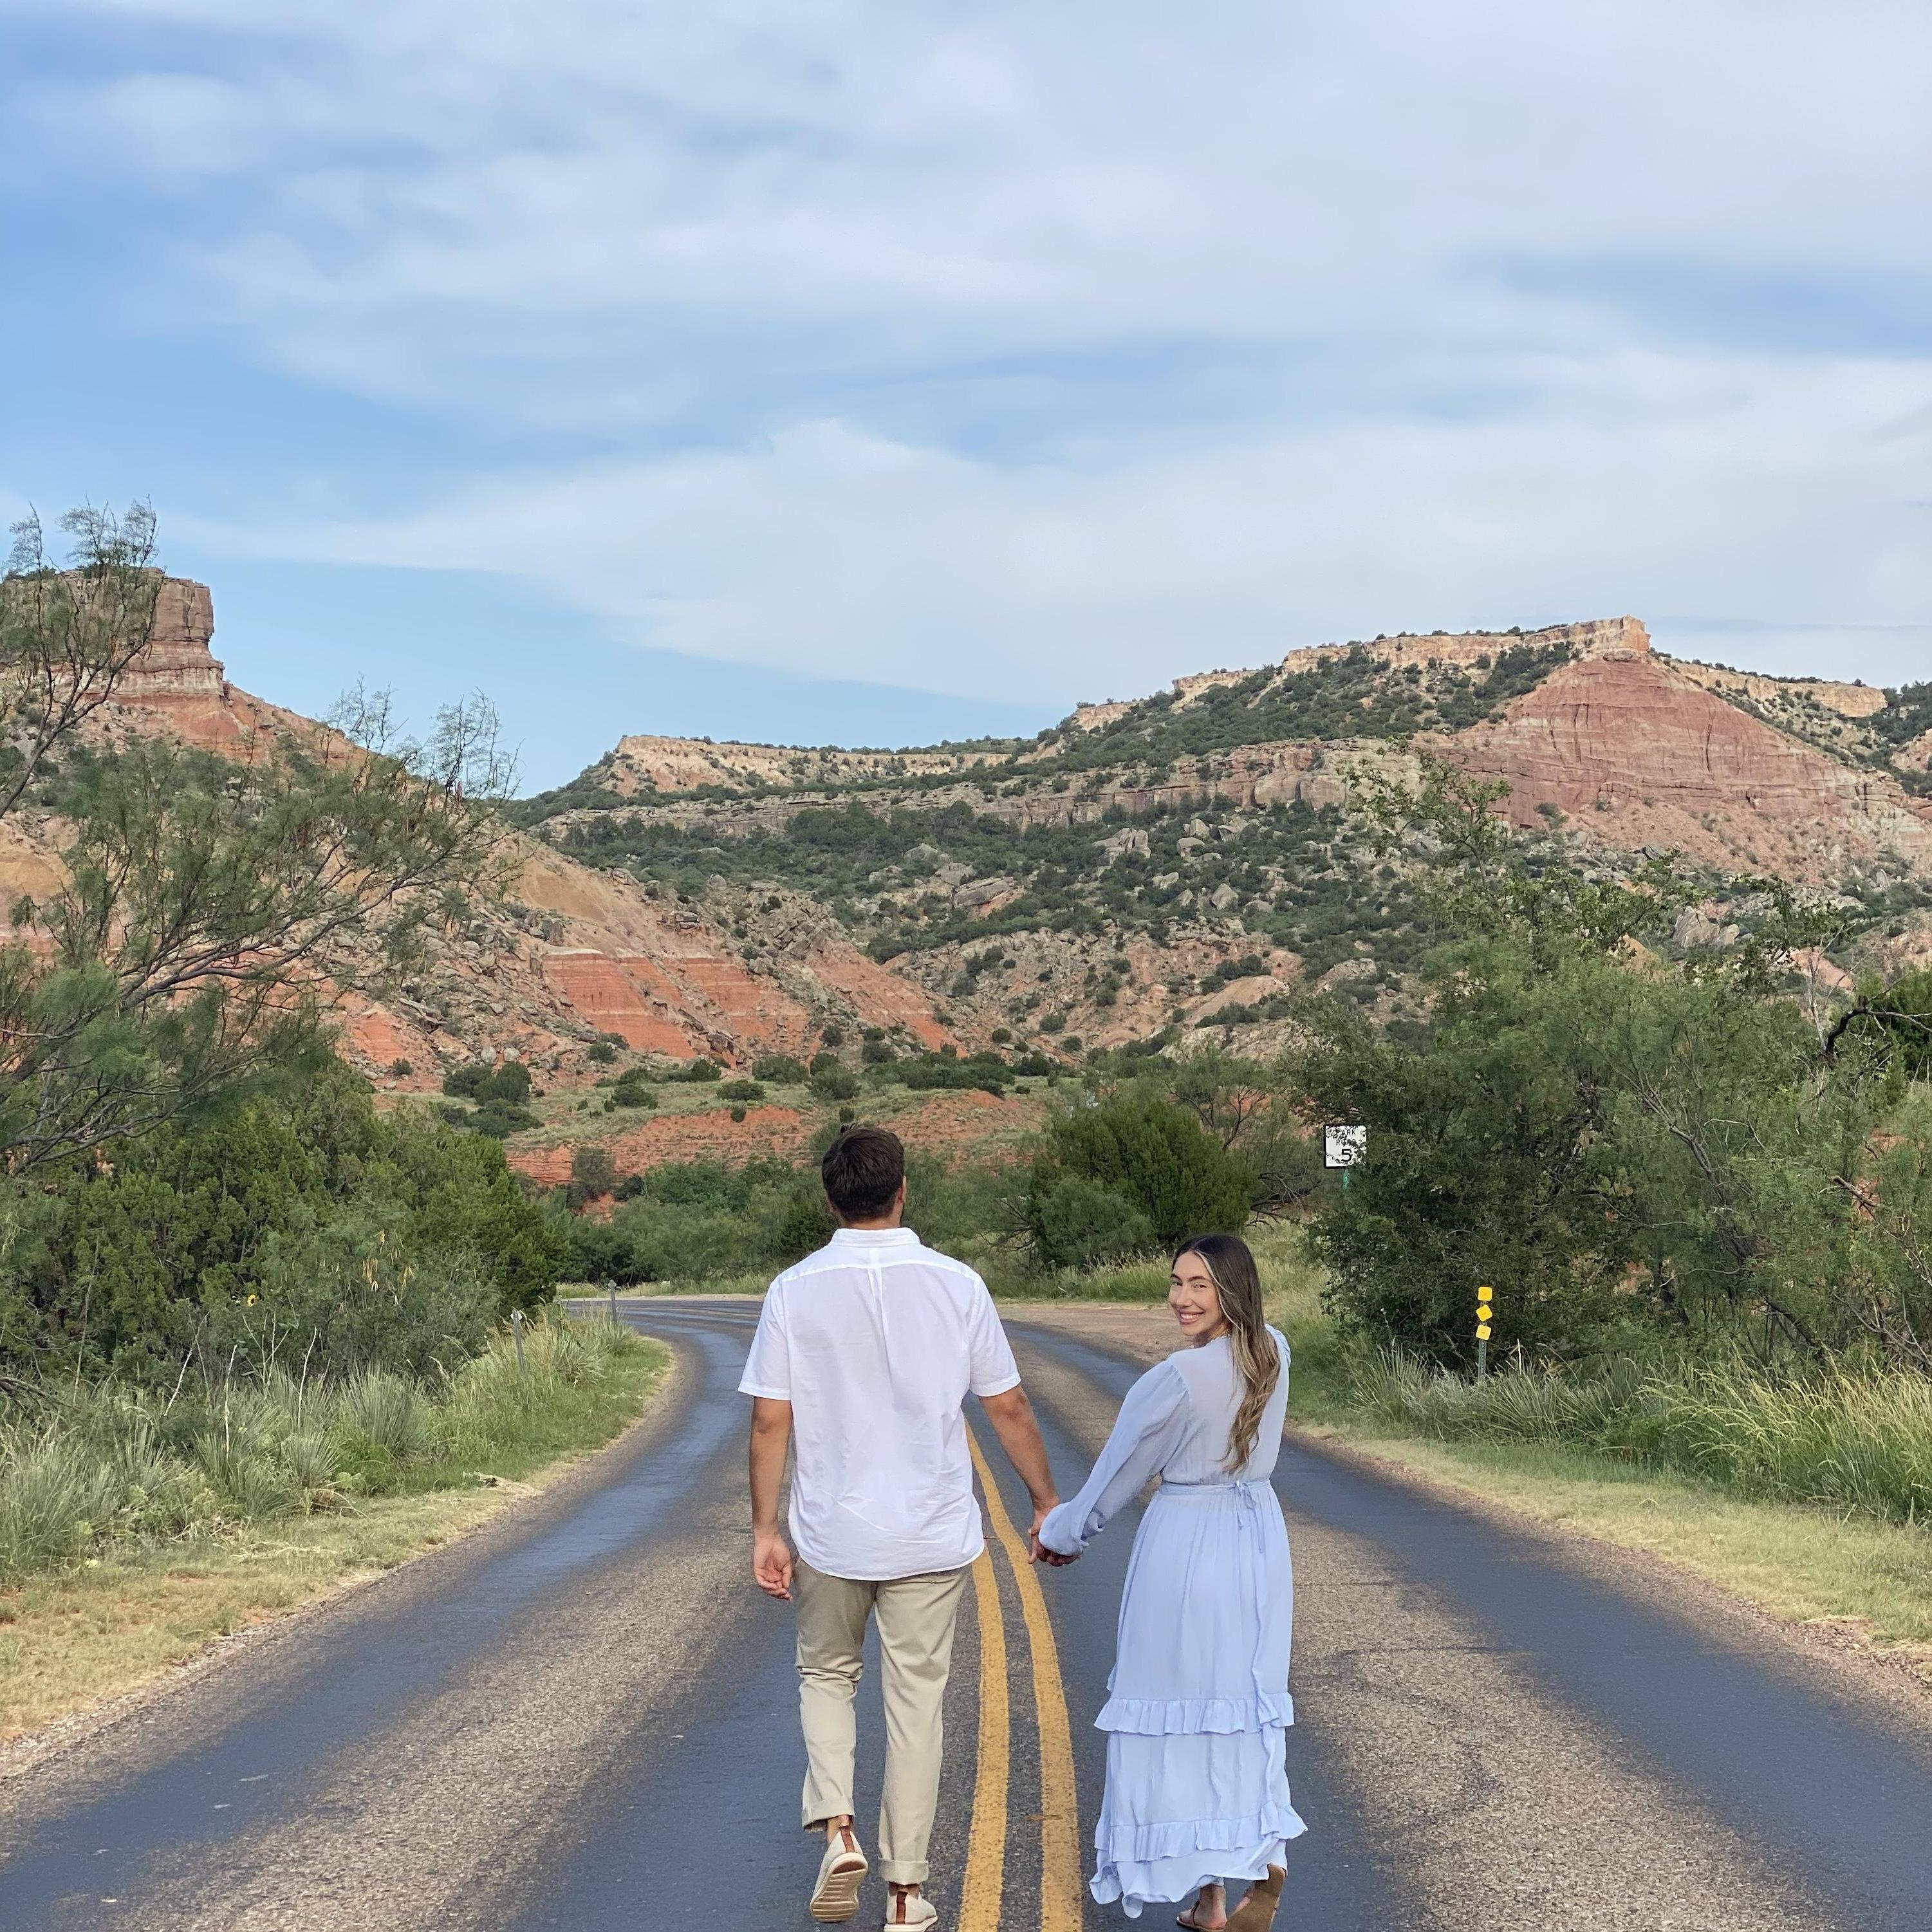 Our first trip to Palo Duro Canyon together.